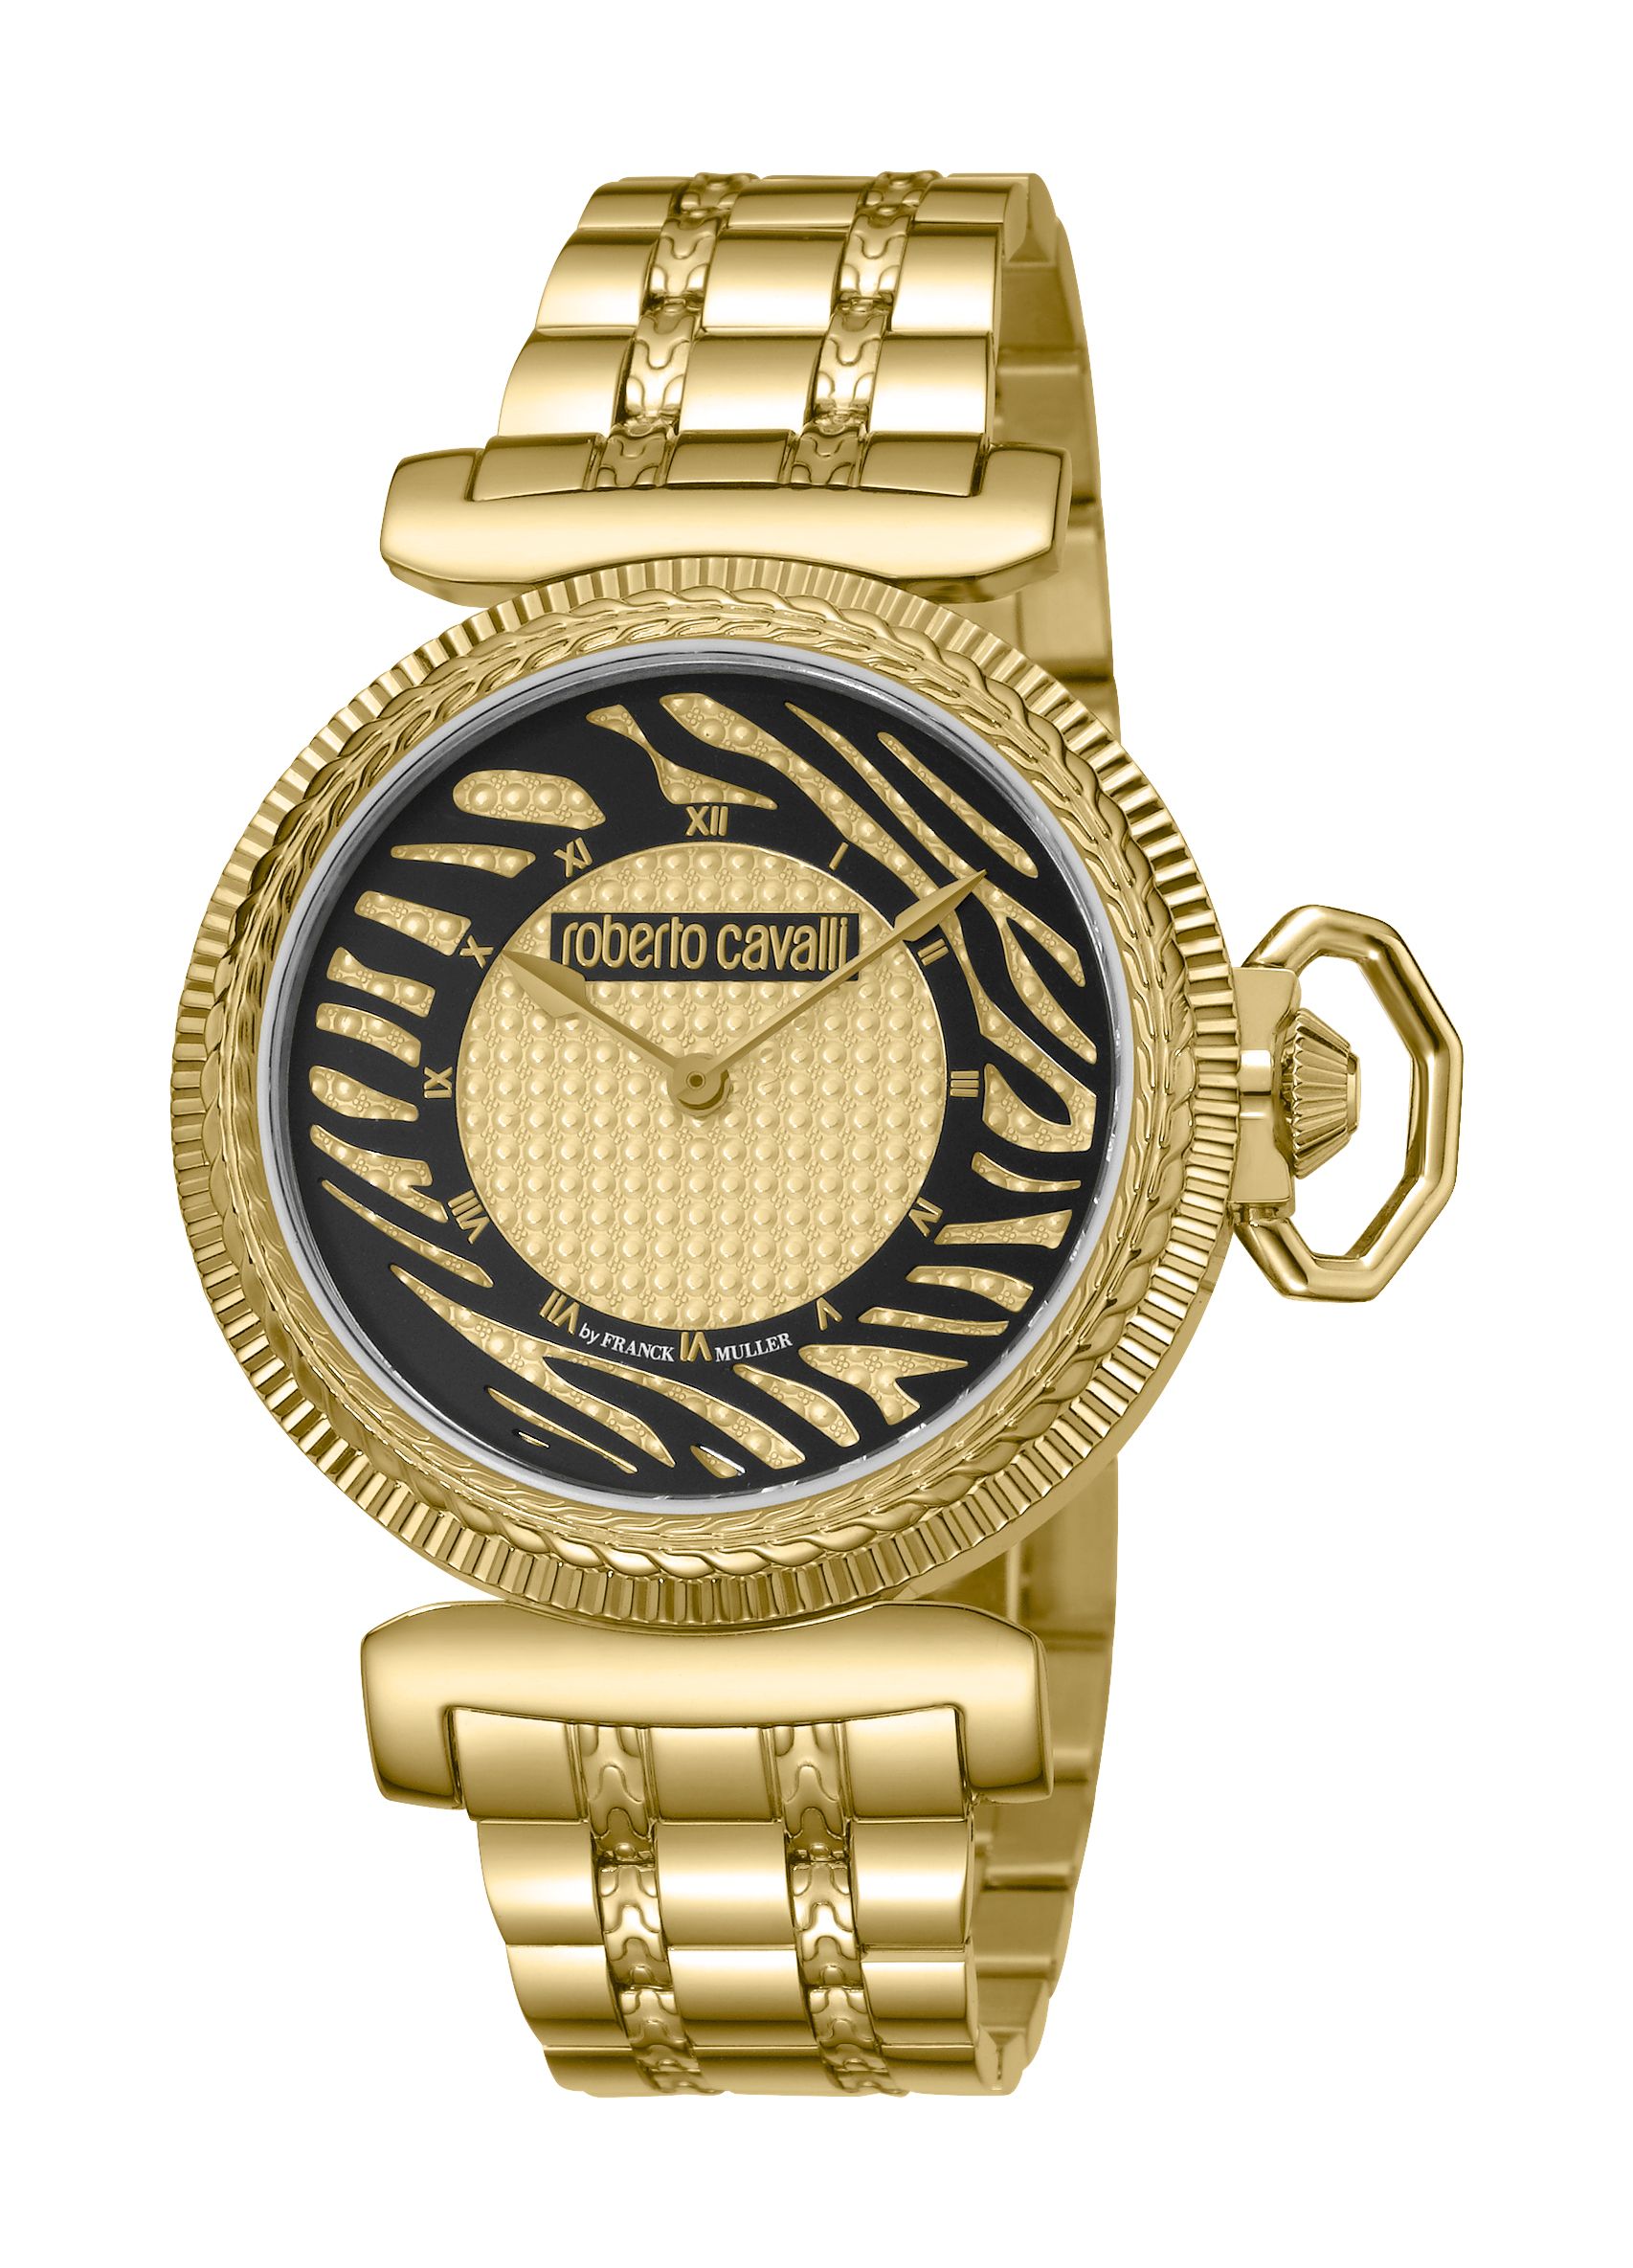 This women's watch from Cavalli features gold-tone stainless steel case with a goldtone bracelet strap. Fashion style watch made for everyday wear. Quartz movement Scratch resistant antireflective sapphire crystal Black animal pattern dial Fixed gold-tone stainless steel bezel Champagne dial with gold-tone hands Dial Type: Analog Push/pull crown Silver-tone dial with gold-tone hands Three-hand Roman numeral & index hour mar. Roberto Cavalli by Franck Muller.